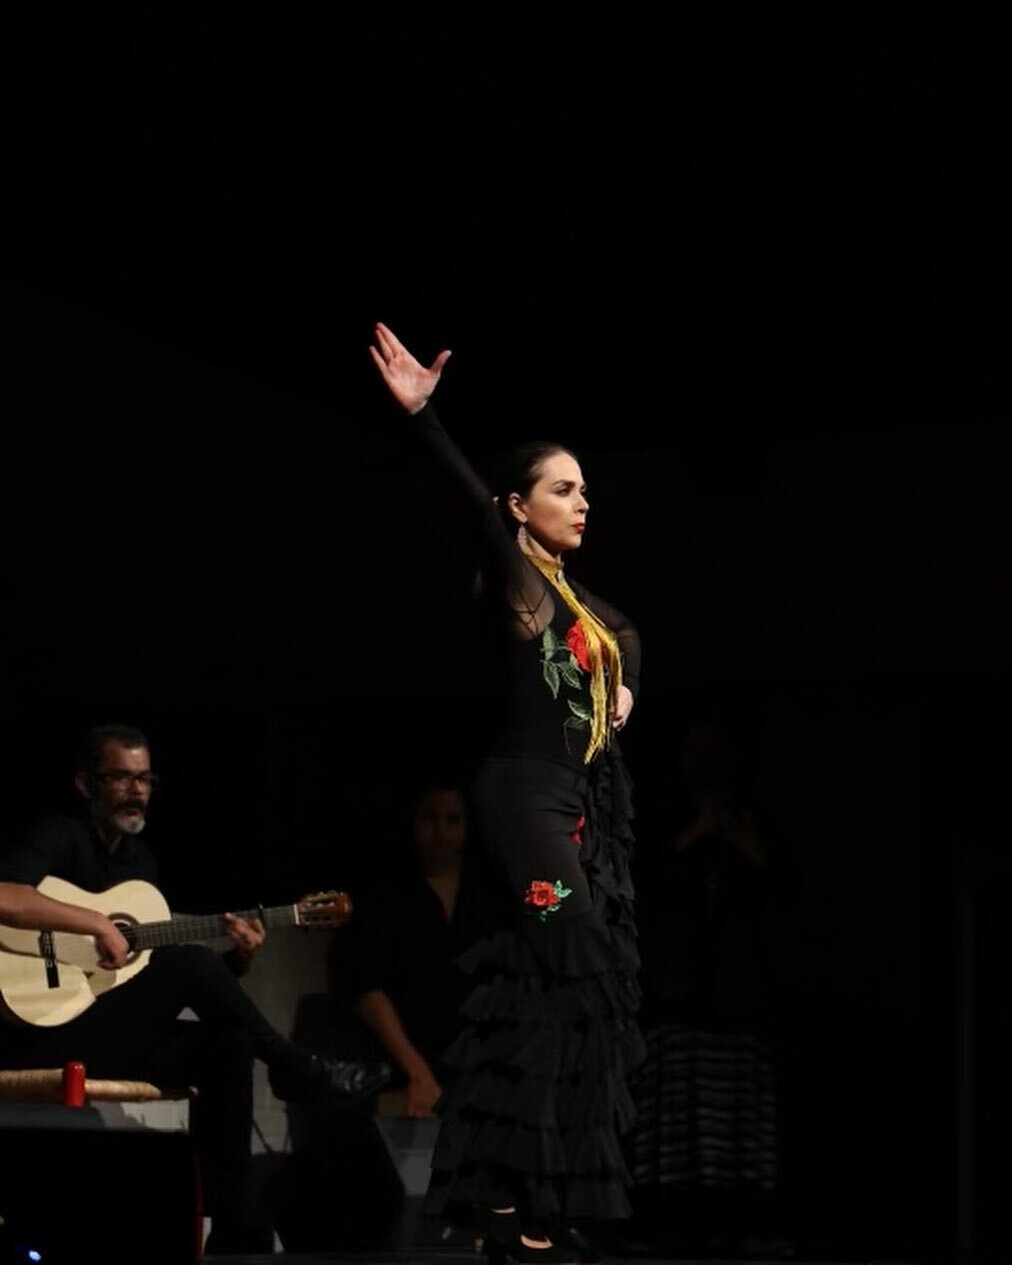 What a night! Our flamenco show &ldquo;A spanish night to remember&rdquo; was a total success! Sorry for the max capacity of 300 atendees! An amazing event for a great cause thank you for the founder David R for believing in our art 💃🏻💫🌟@redmthem